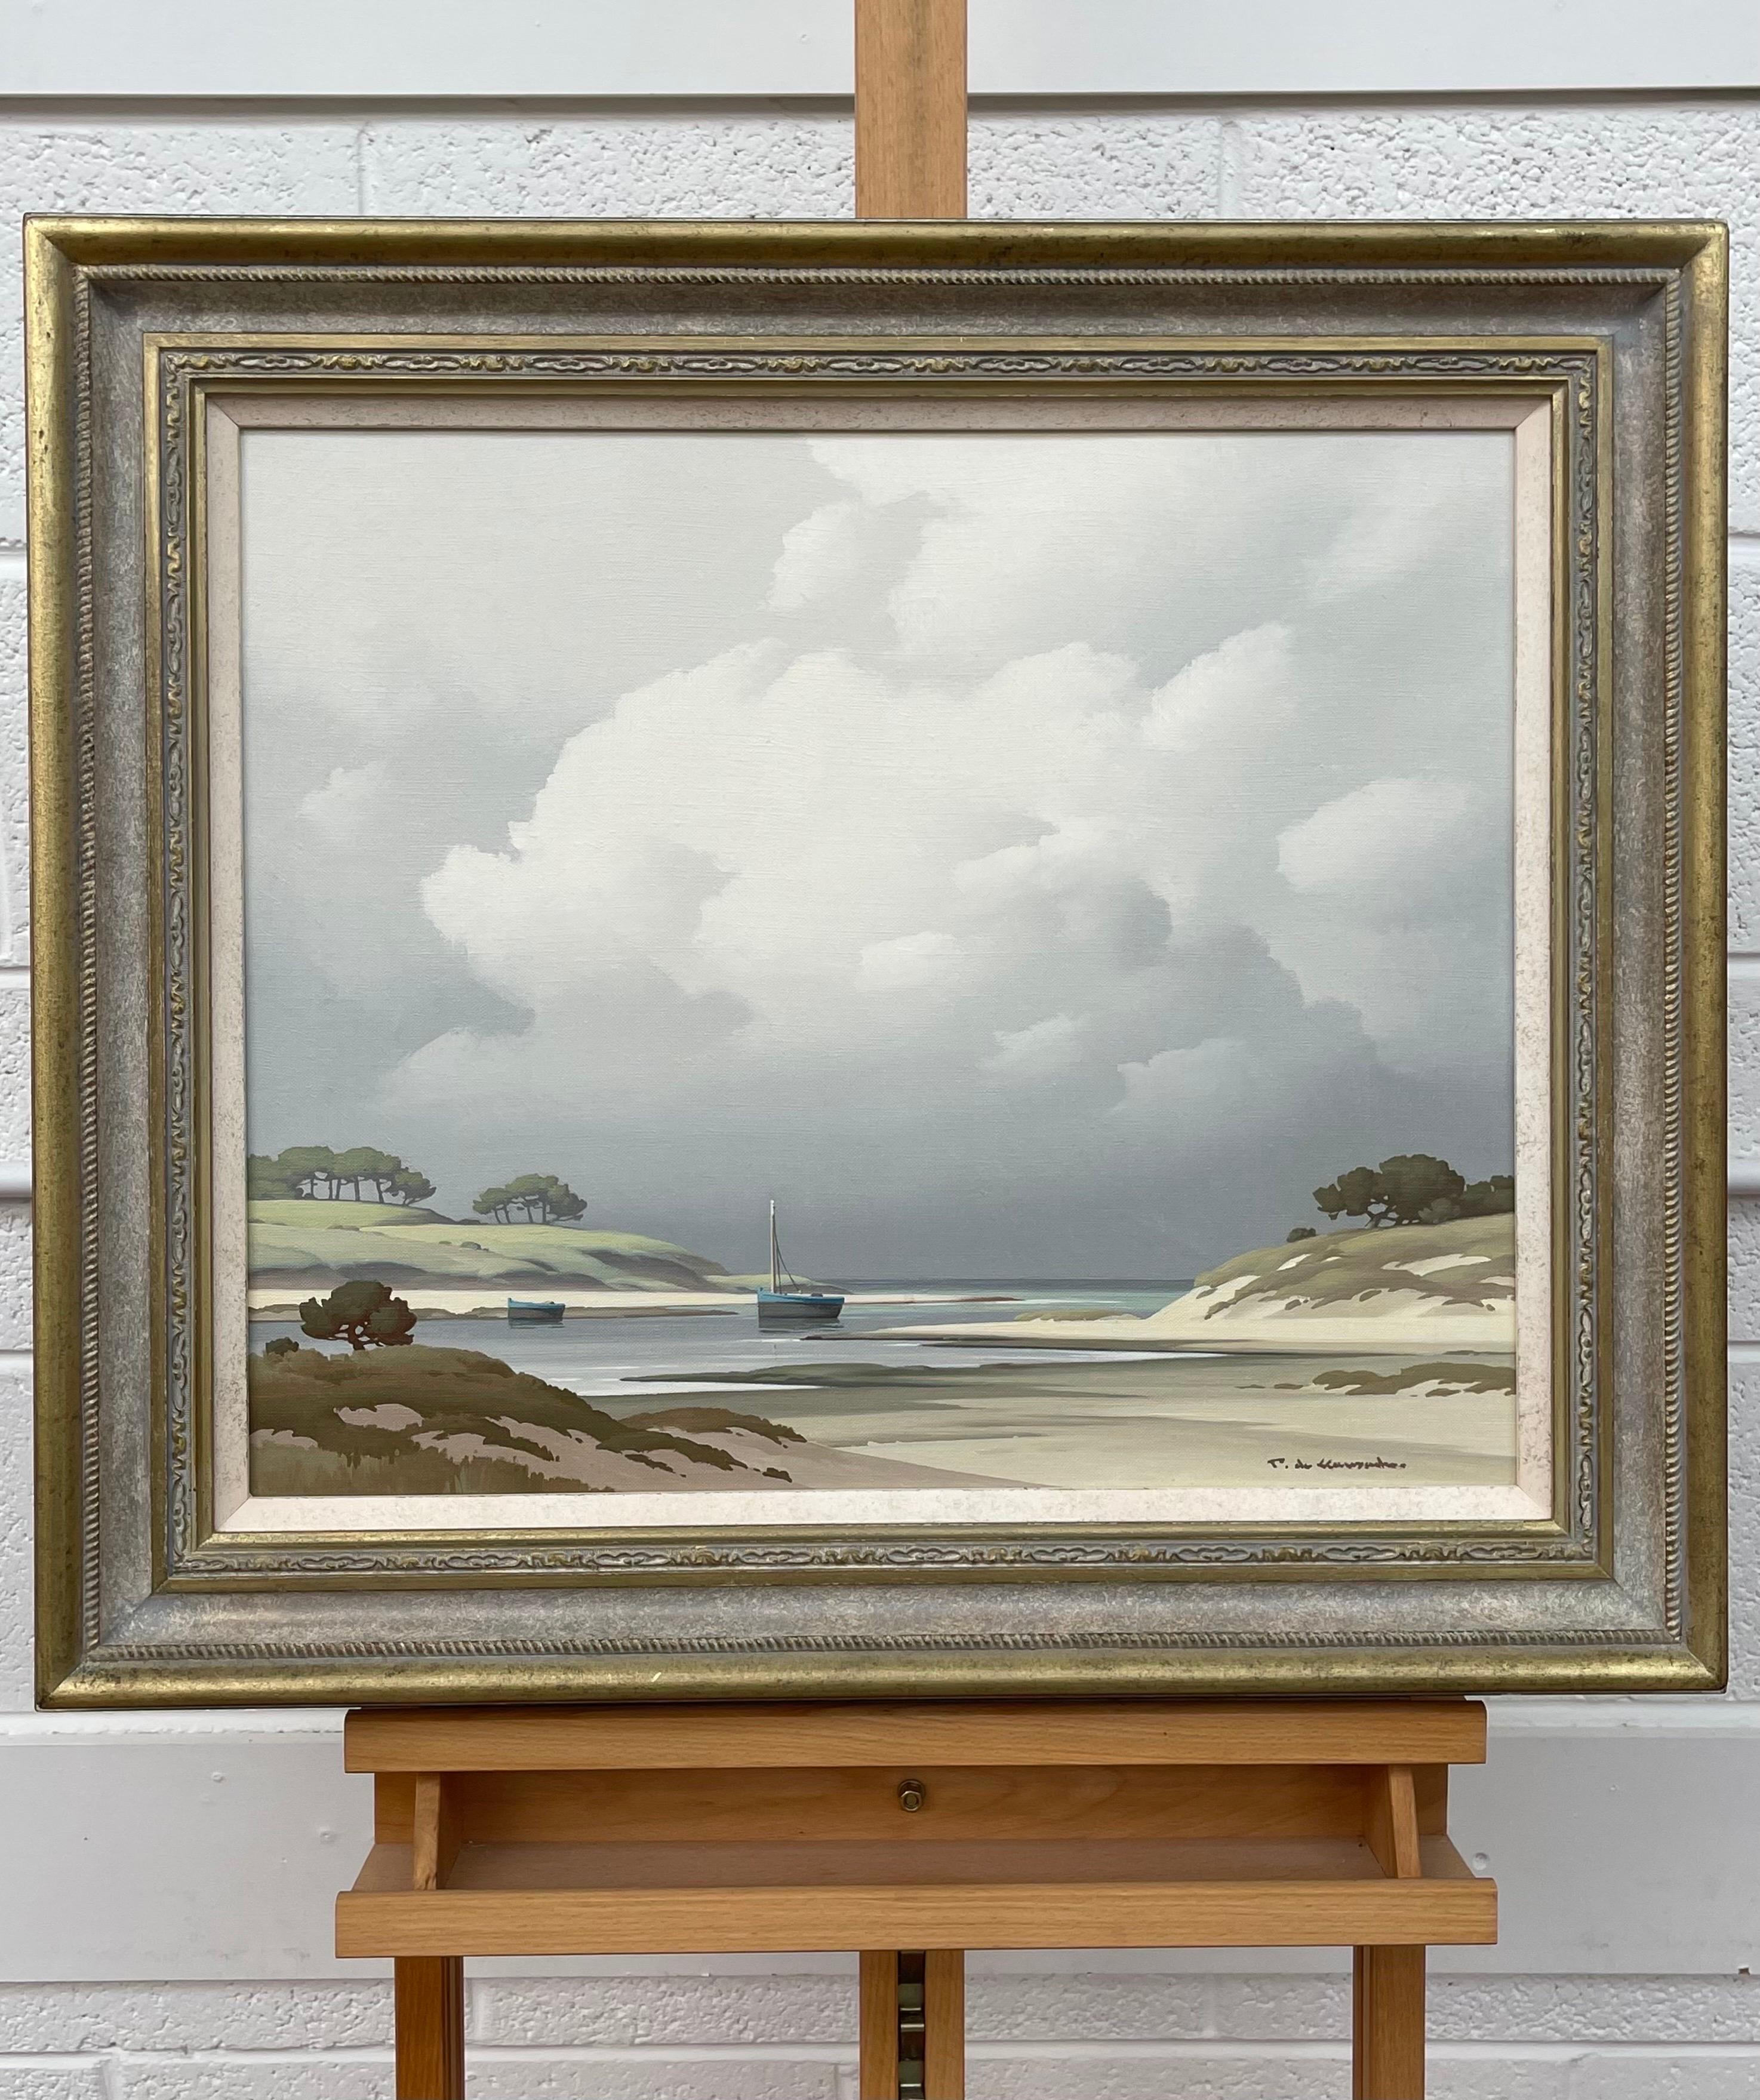 Coastal Seascape Landscape Painting with Boats by 20th Century French Artist, Pierre de Clausade (1910-1976). 
Oil on canvas, Signed on the lower right, Titled 